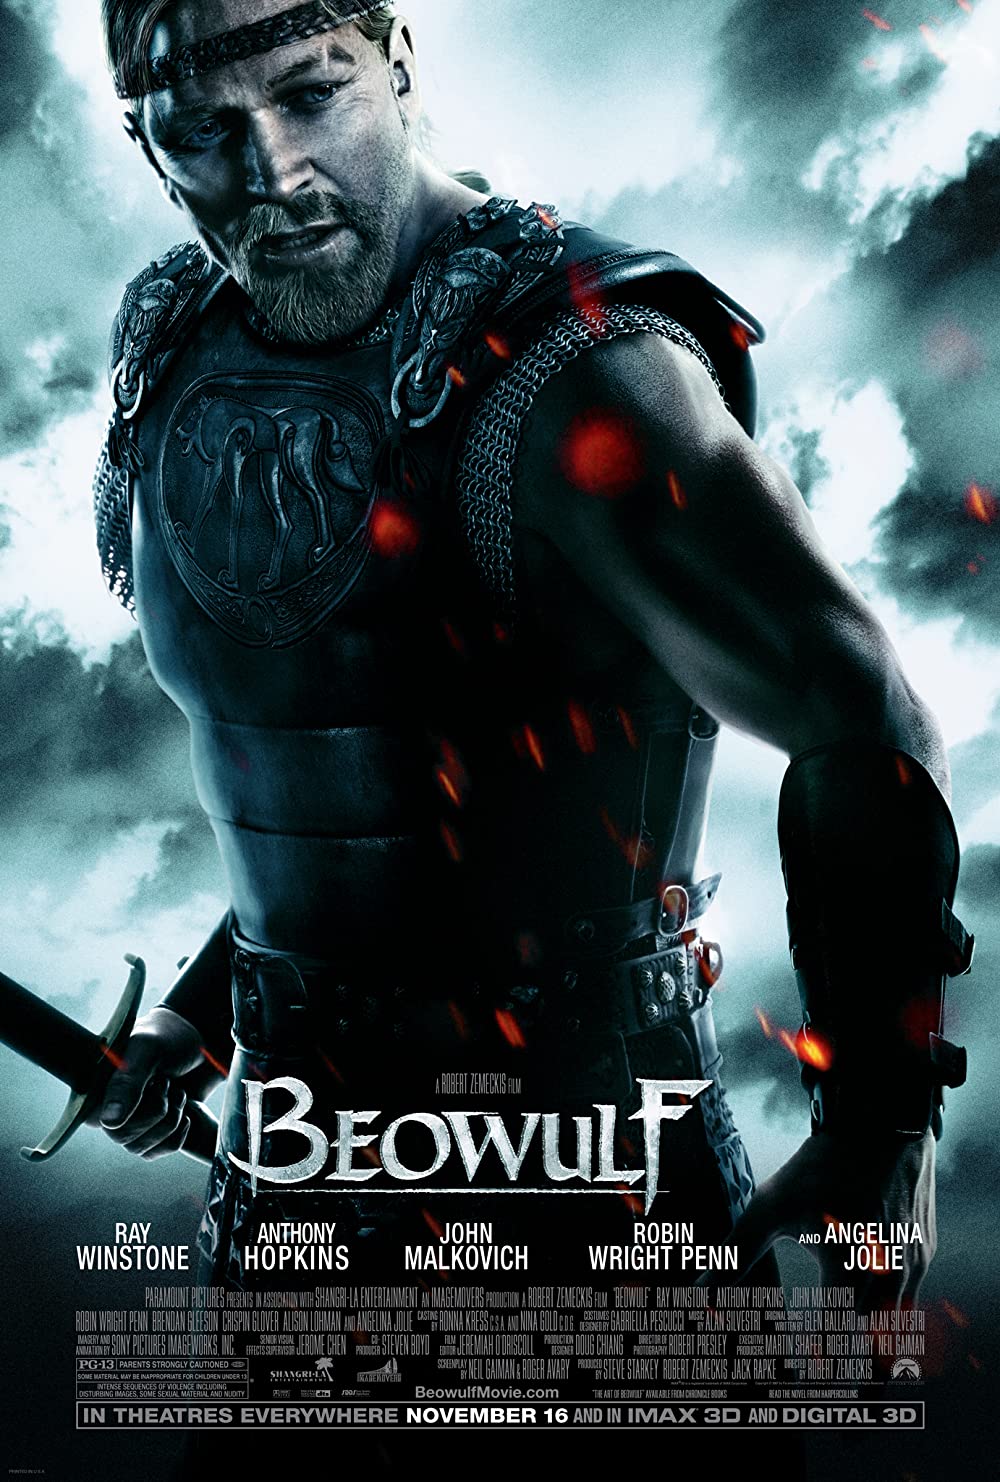 FULL MOVIE: Beowulf (2007) [Action]